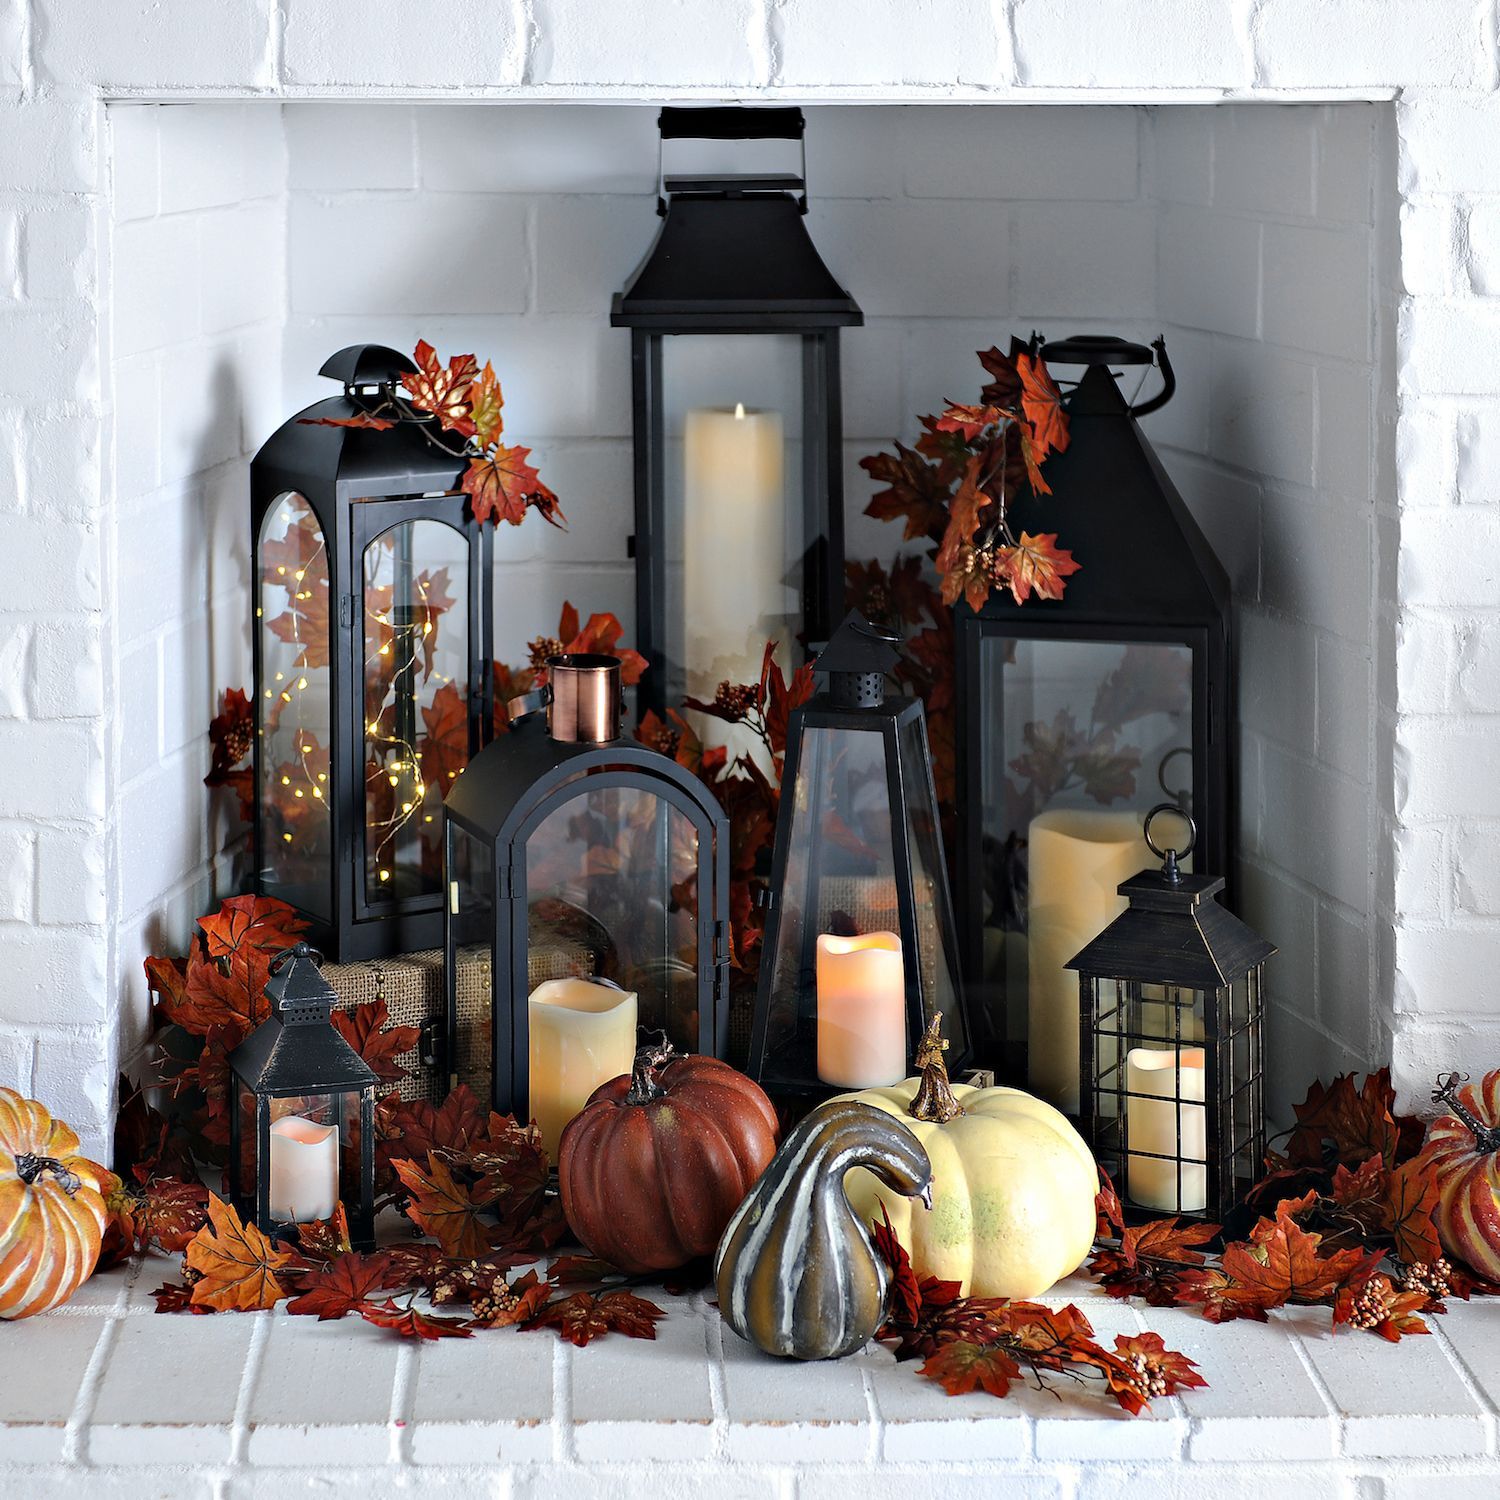 Use your fireplace as another space in your home to decorate for fall! Fill it with an array of lanterns and create a statement. You can also fill the lanterns with string lights, candles or leaves for a fall look! -   24 apartment fireplace decor ideas